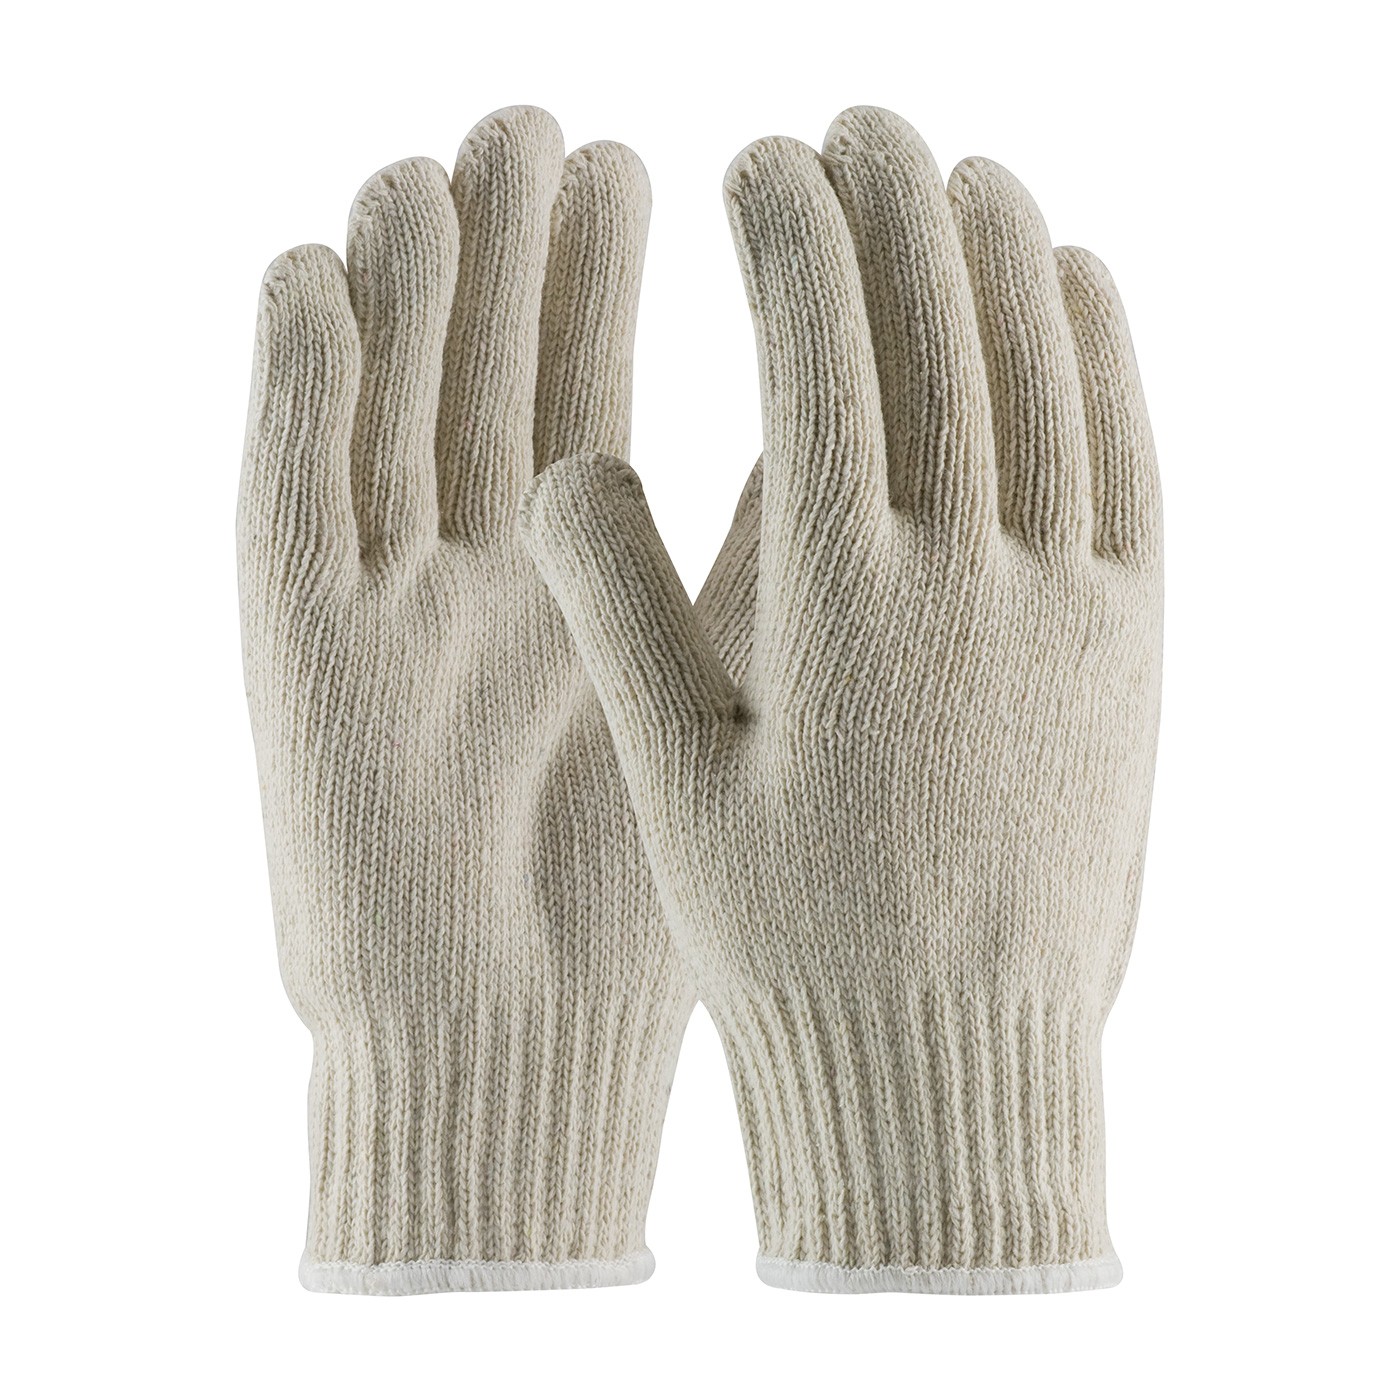 PIP® Extra Heavy Weight Seamless Knit Cotton/Polyester Glove - Natural  (#35-C510)